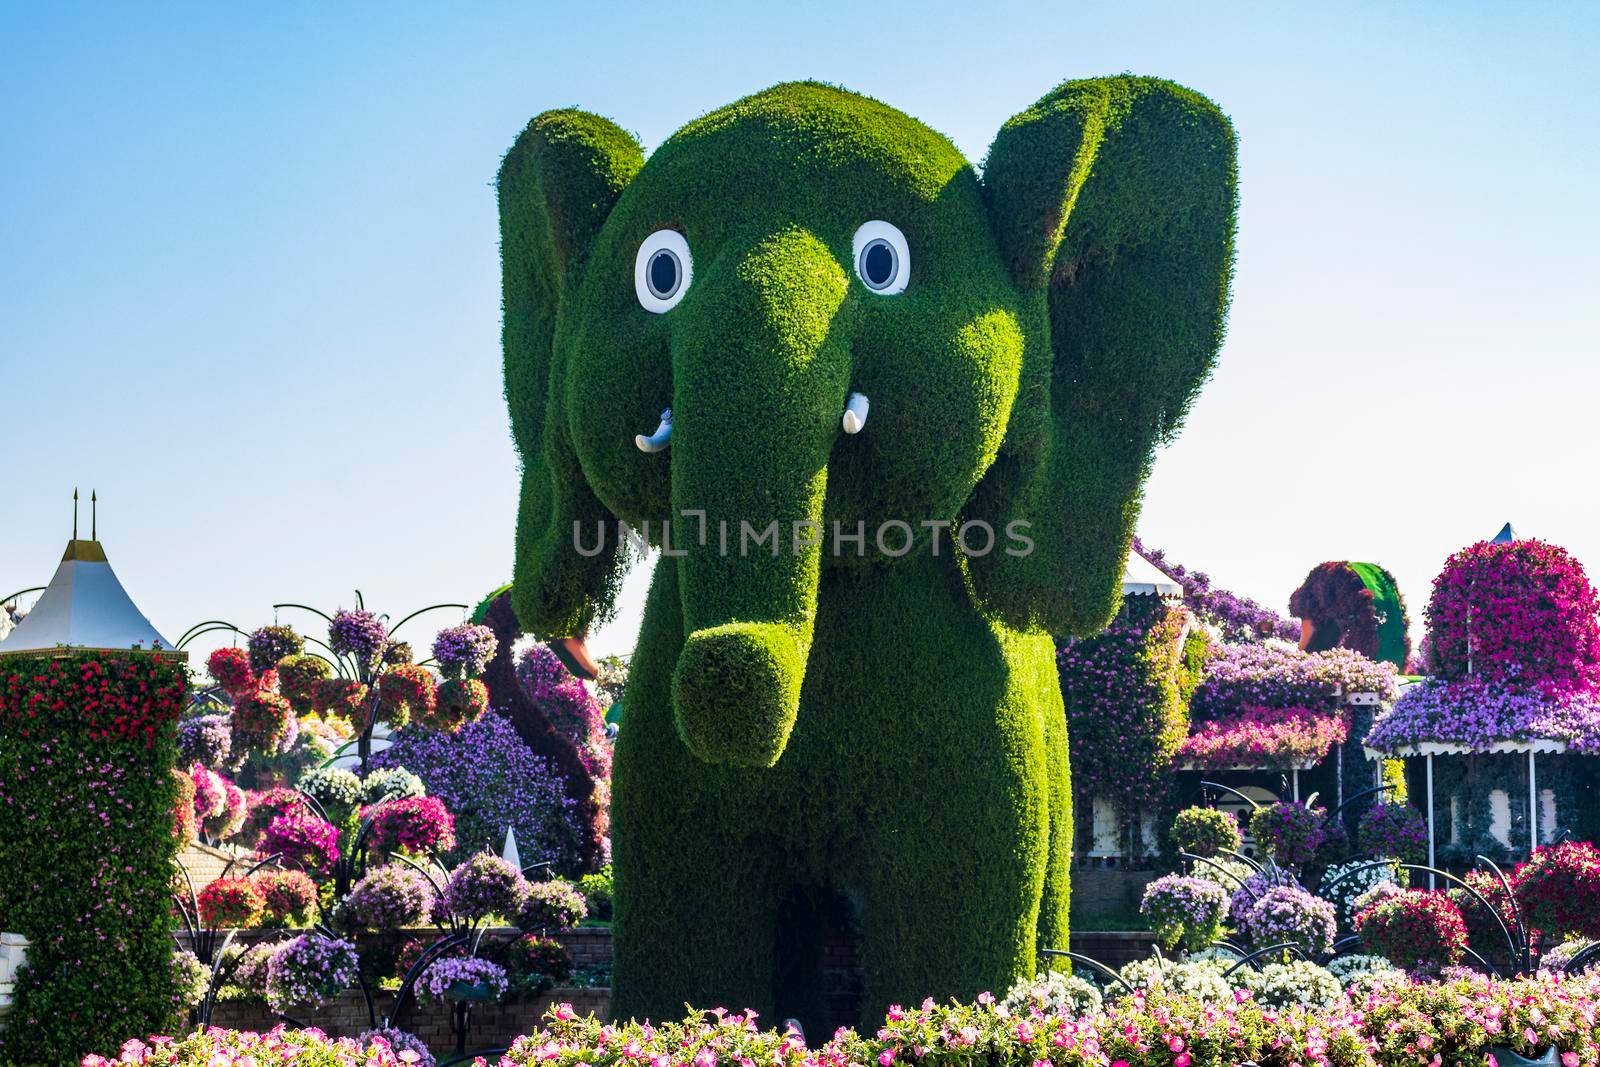 Dubai, UAE - 03.06.2020 Flower and landscaping installations in Dubai miracle garden. Sightseeing by pazemin